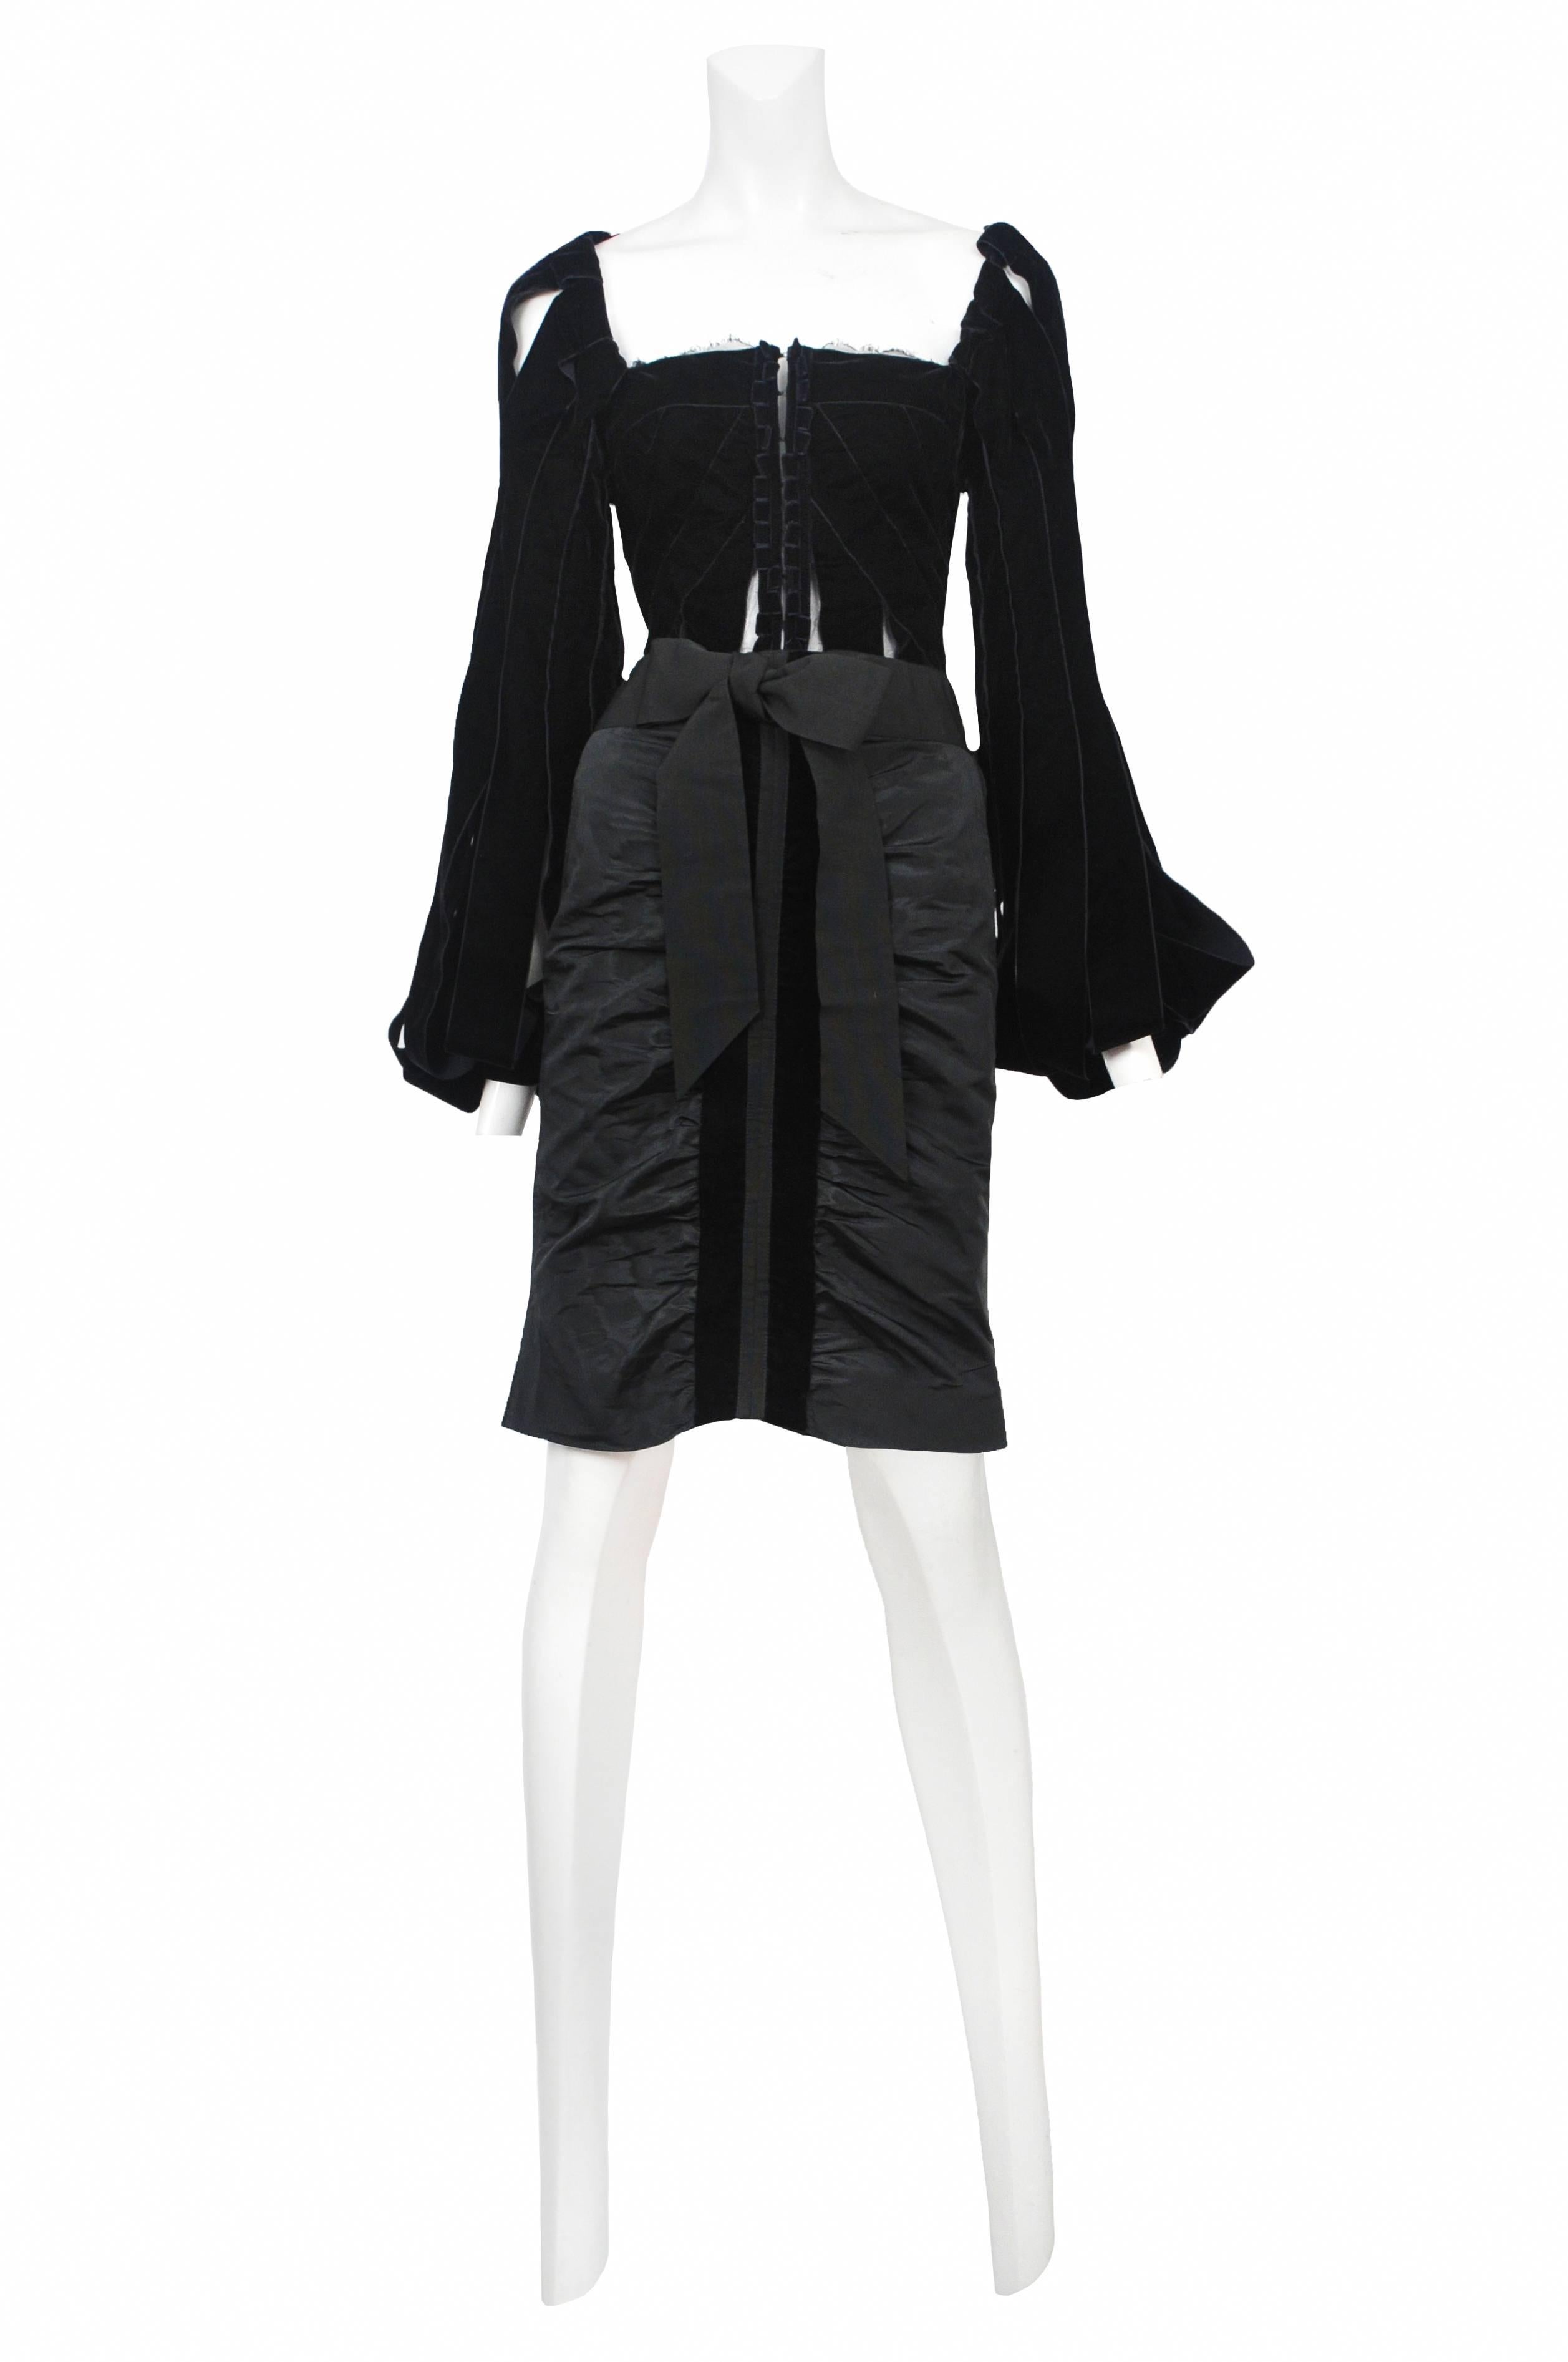 Vintage Tom Ford for Yves Saint Laurent velvet ribbon ensemble featuring a velvet corset style bodice and a gathered satin skirt finished with grosgrain ribbon detailing. Runway look from the Fall 2002 Collection.
Please inquire for additional